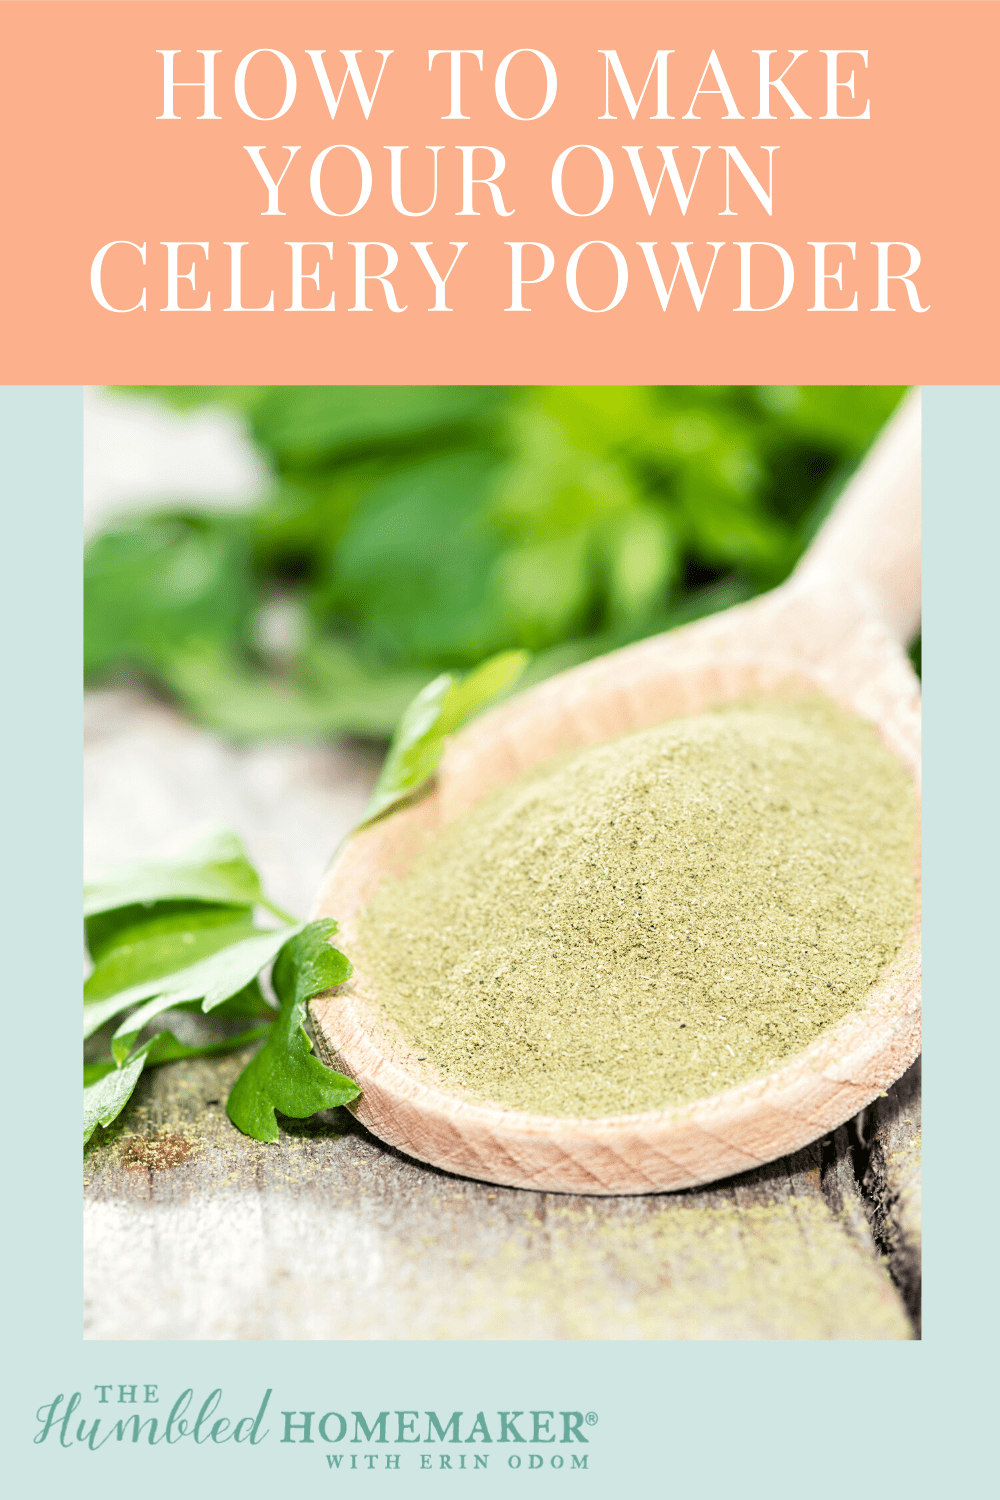 If you love homemade seasonings and spice mixes, add celery powder to the list! This simple tutorial will show you how to make your own DIY celery powder.